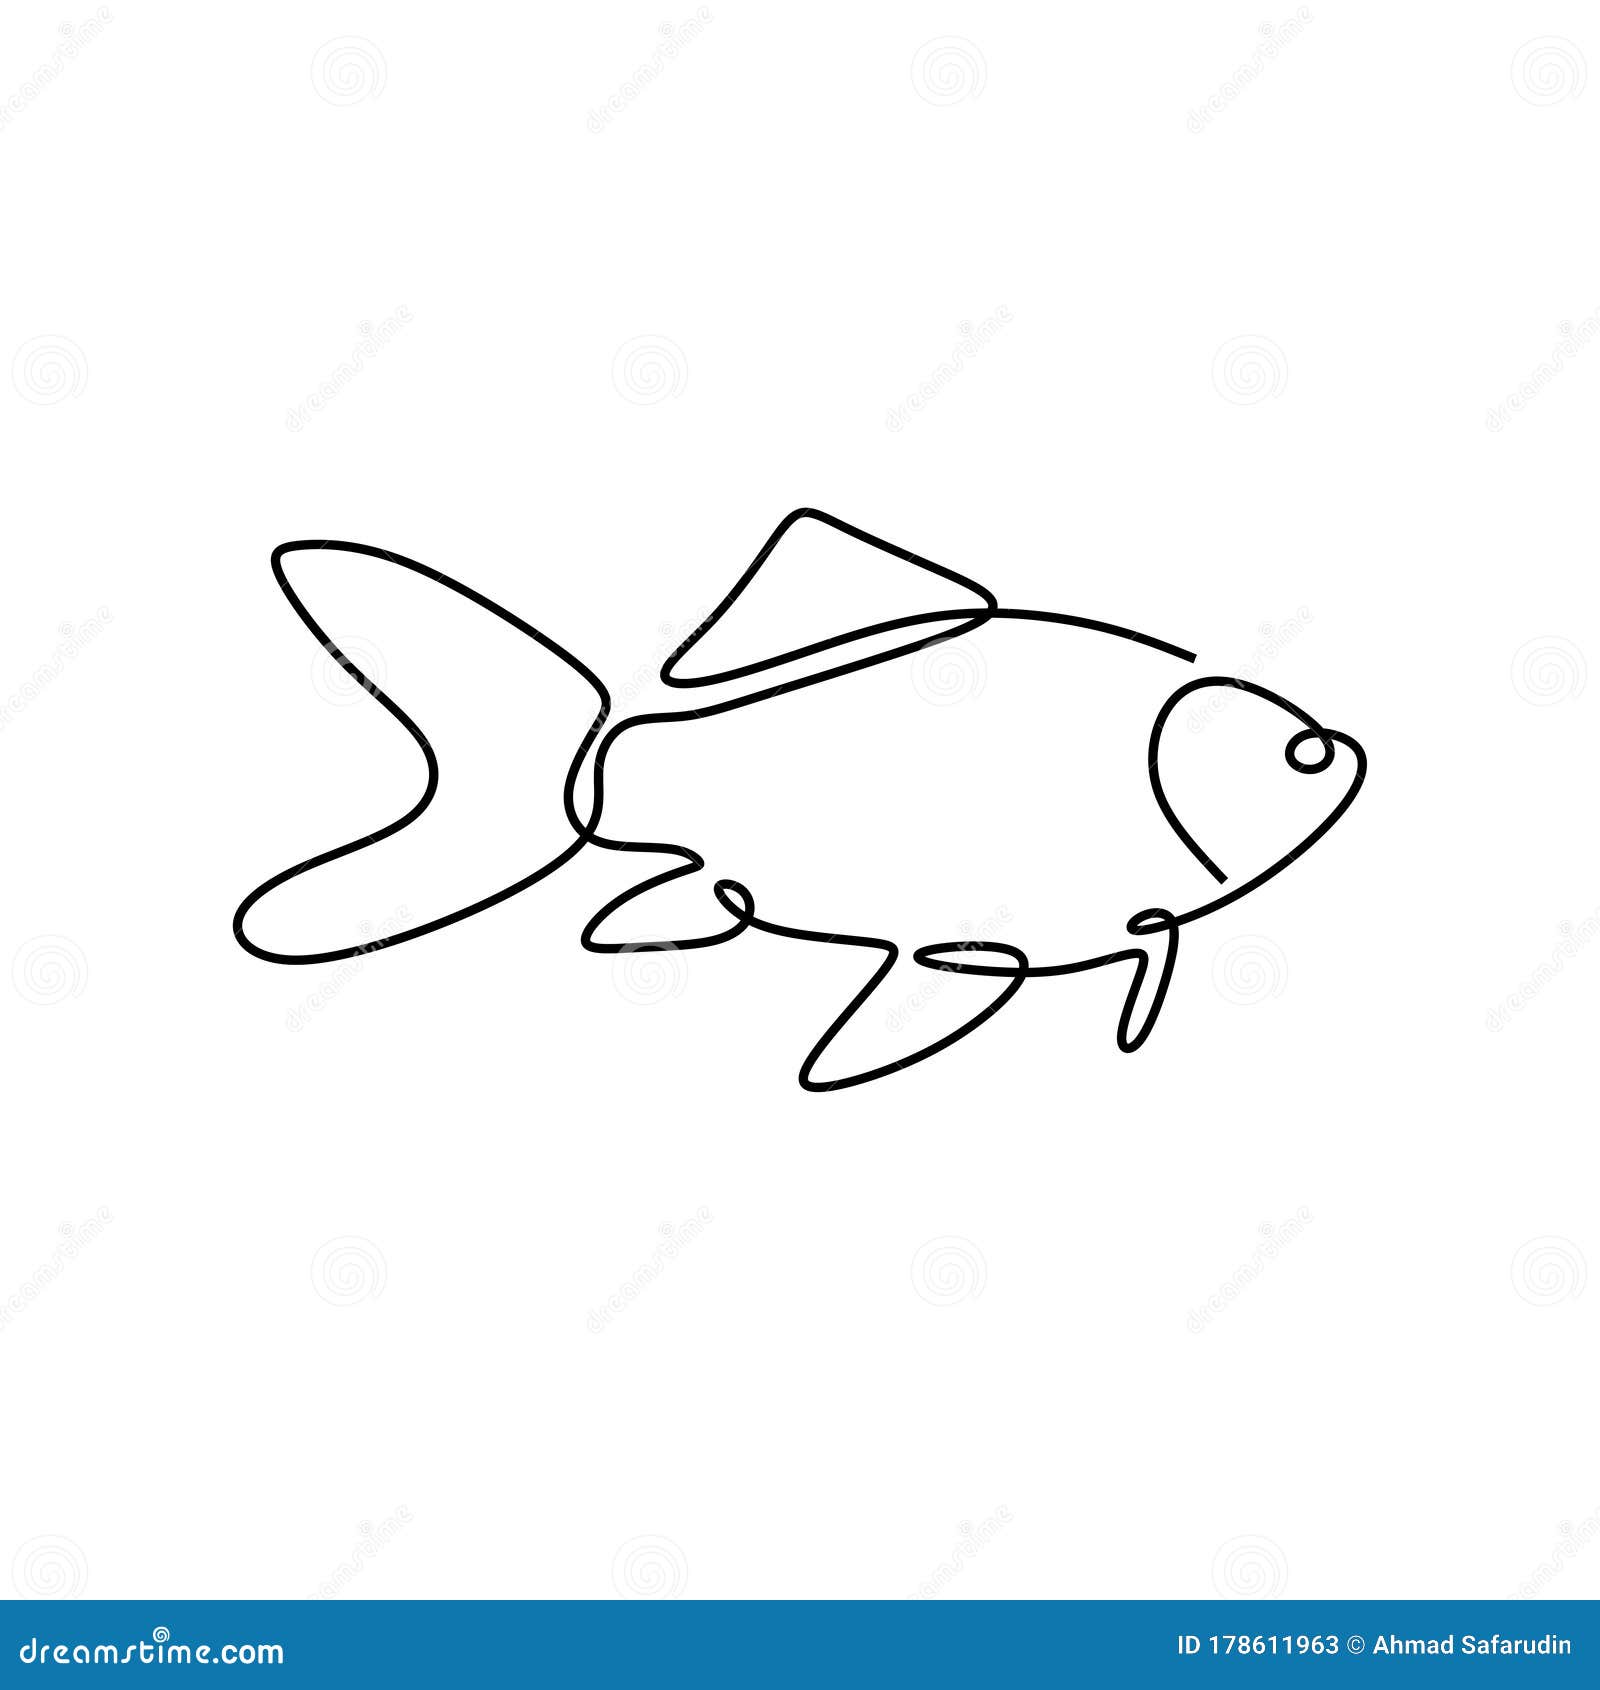 https://thumbs.dreamstime.com/z/fish-one-line-drawing-vector-illustration-minimalism-style-fish-one-line-drawing-vector-illustration-minimalism-style-178611963.jpg